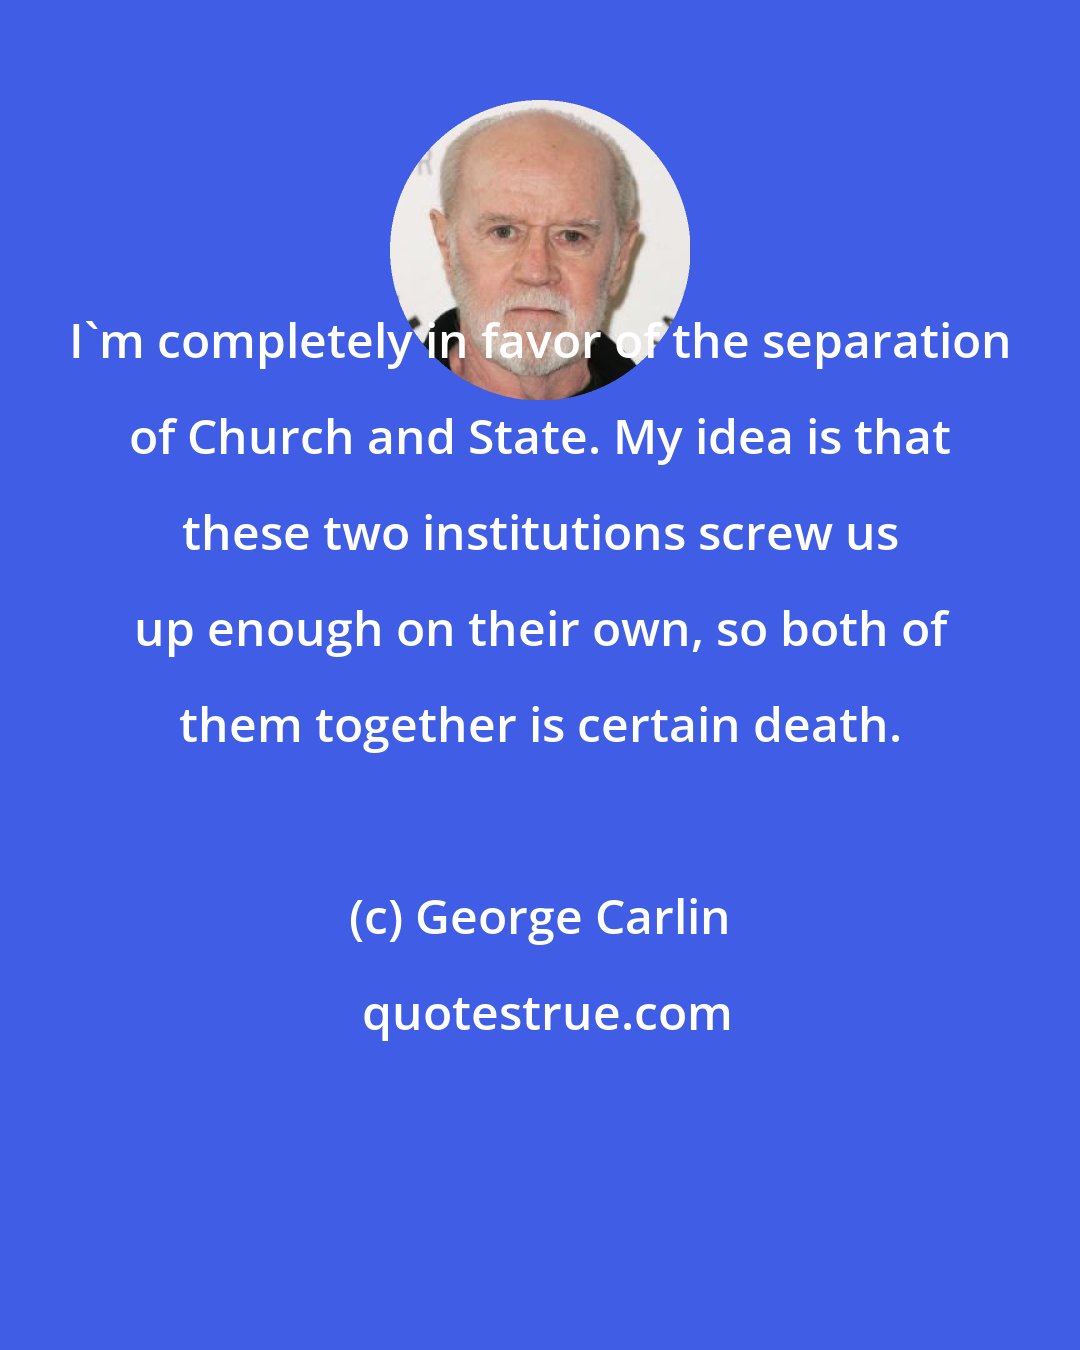 George Carlin: I'm completely in favor of the separation of Church and State. My idea is that these two institutions screw us up enough on their own, so both of them together is certain death.